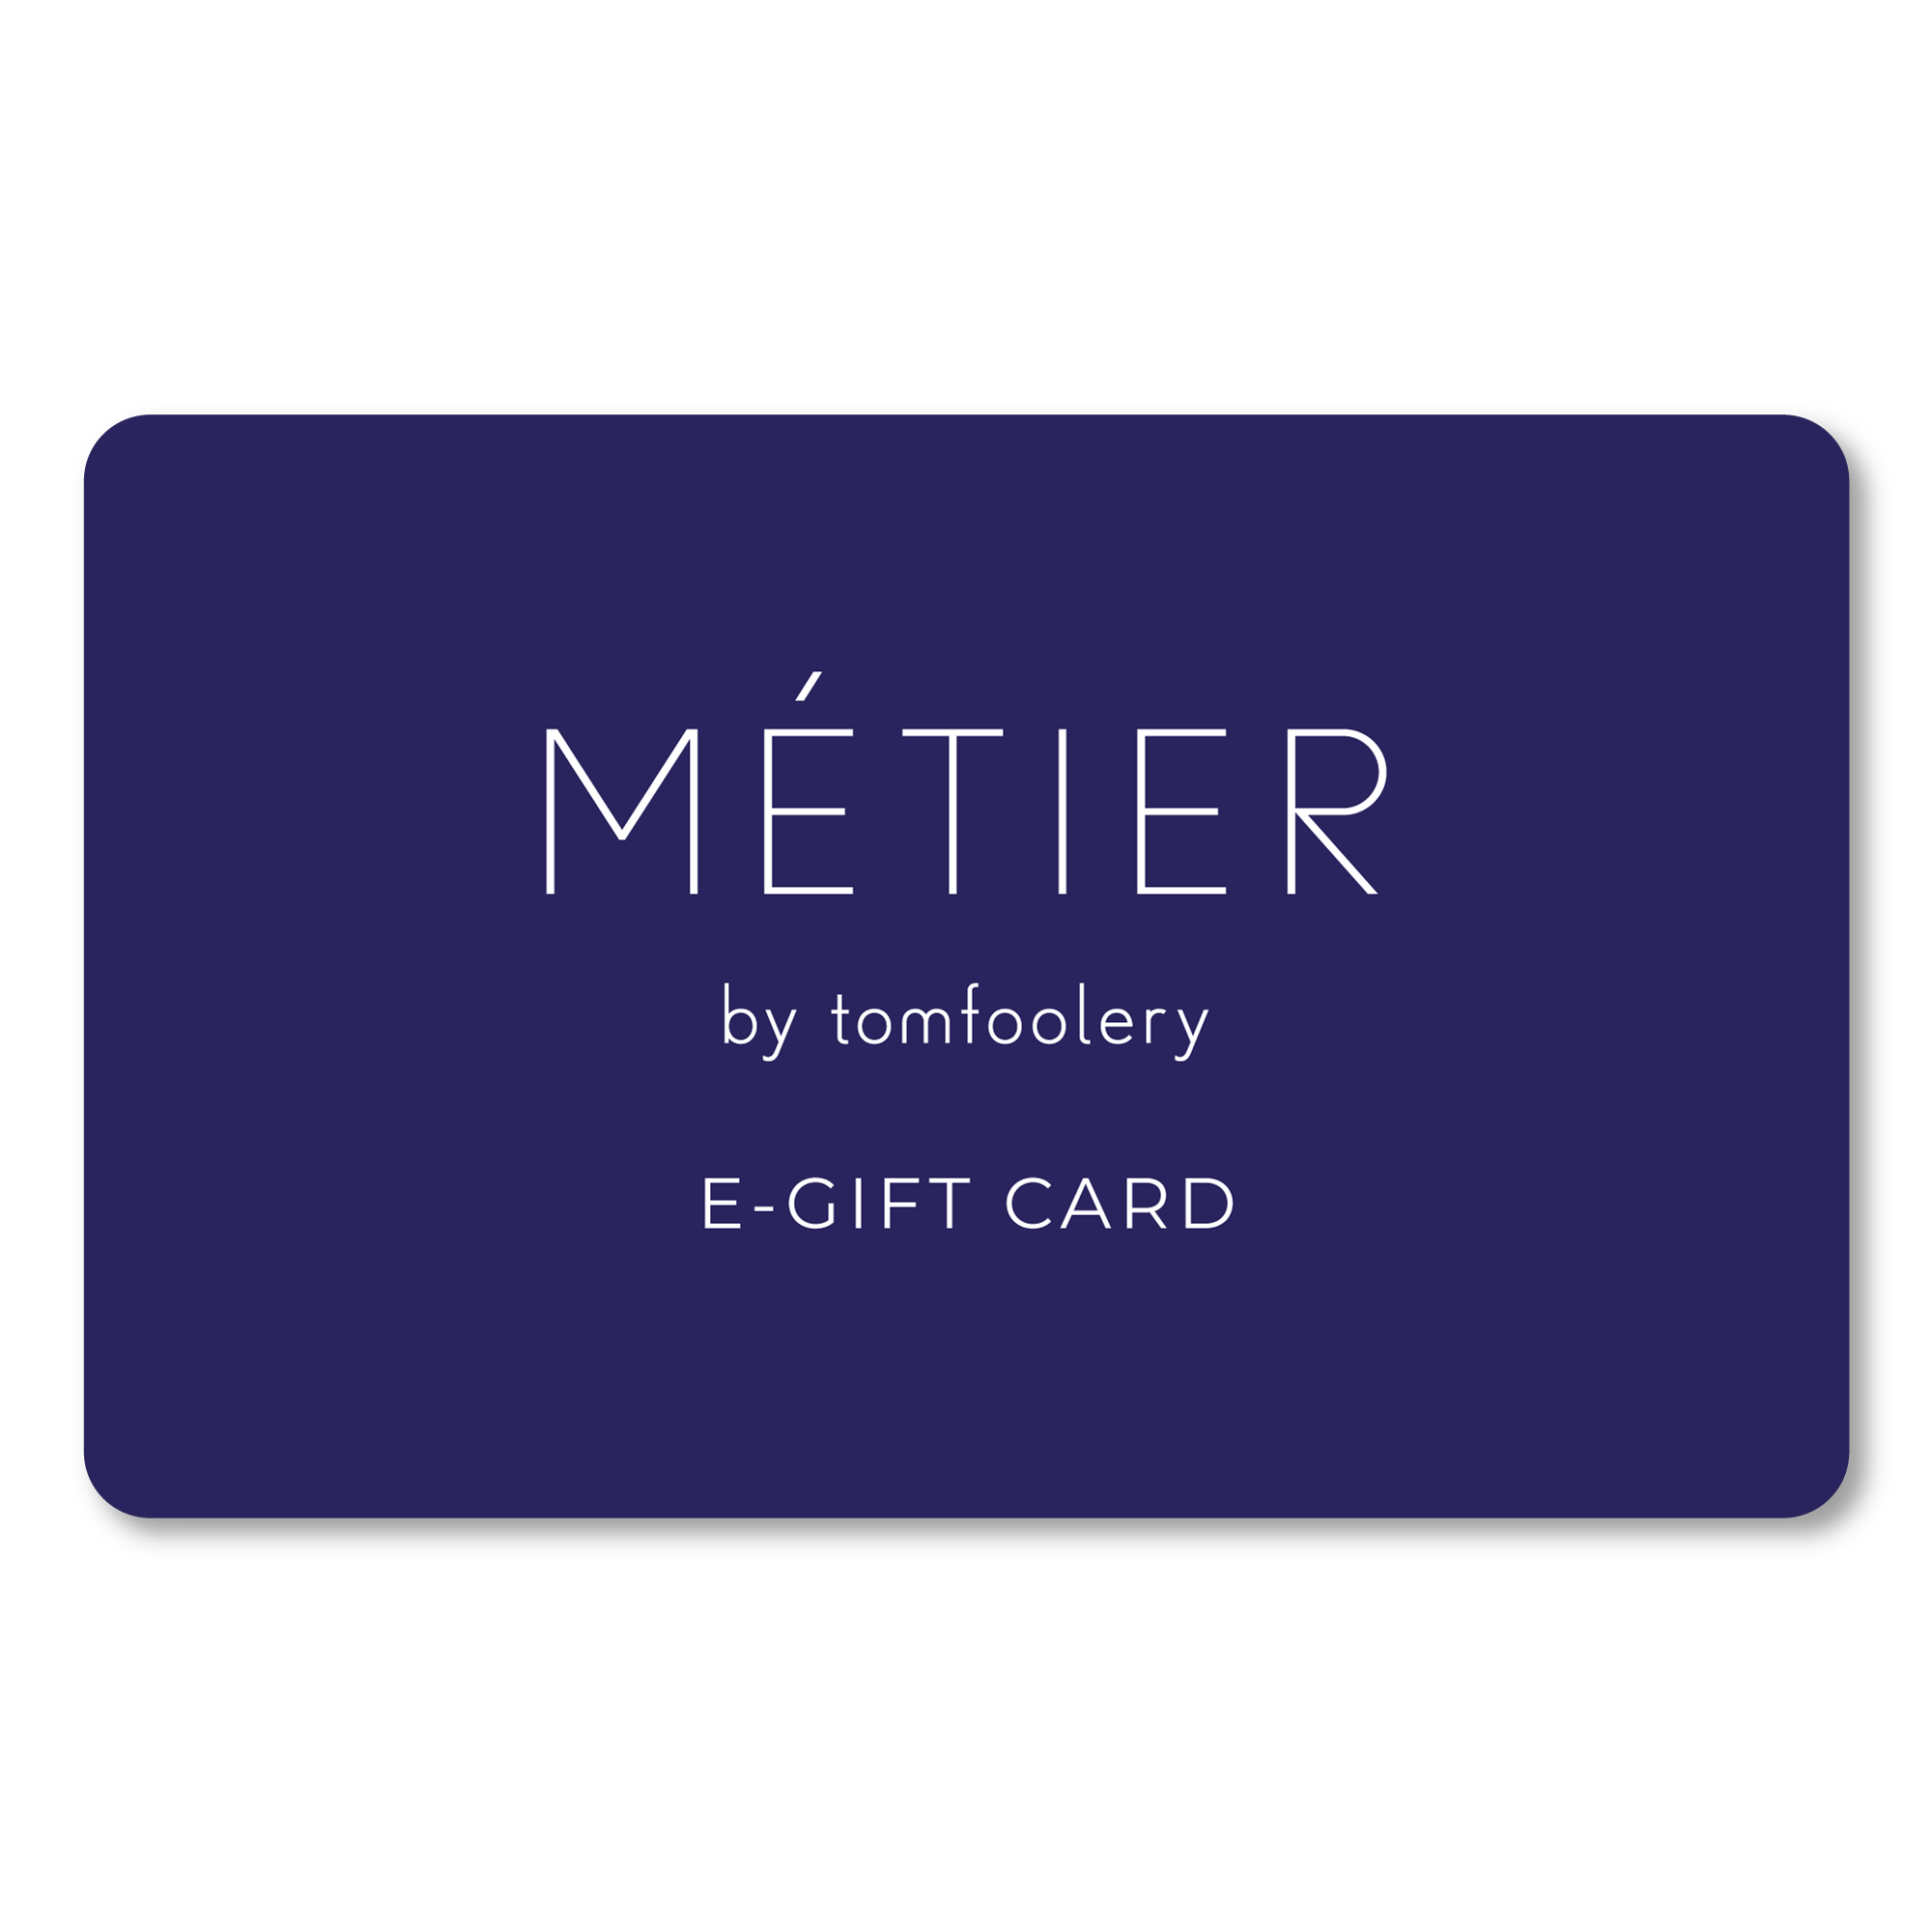 metier by tomfoolery gift card